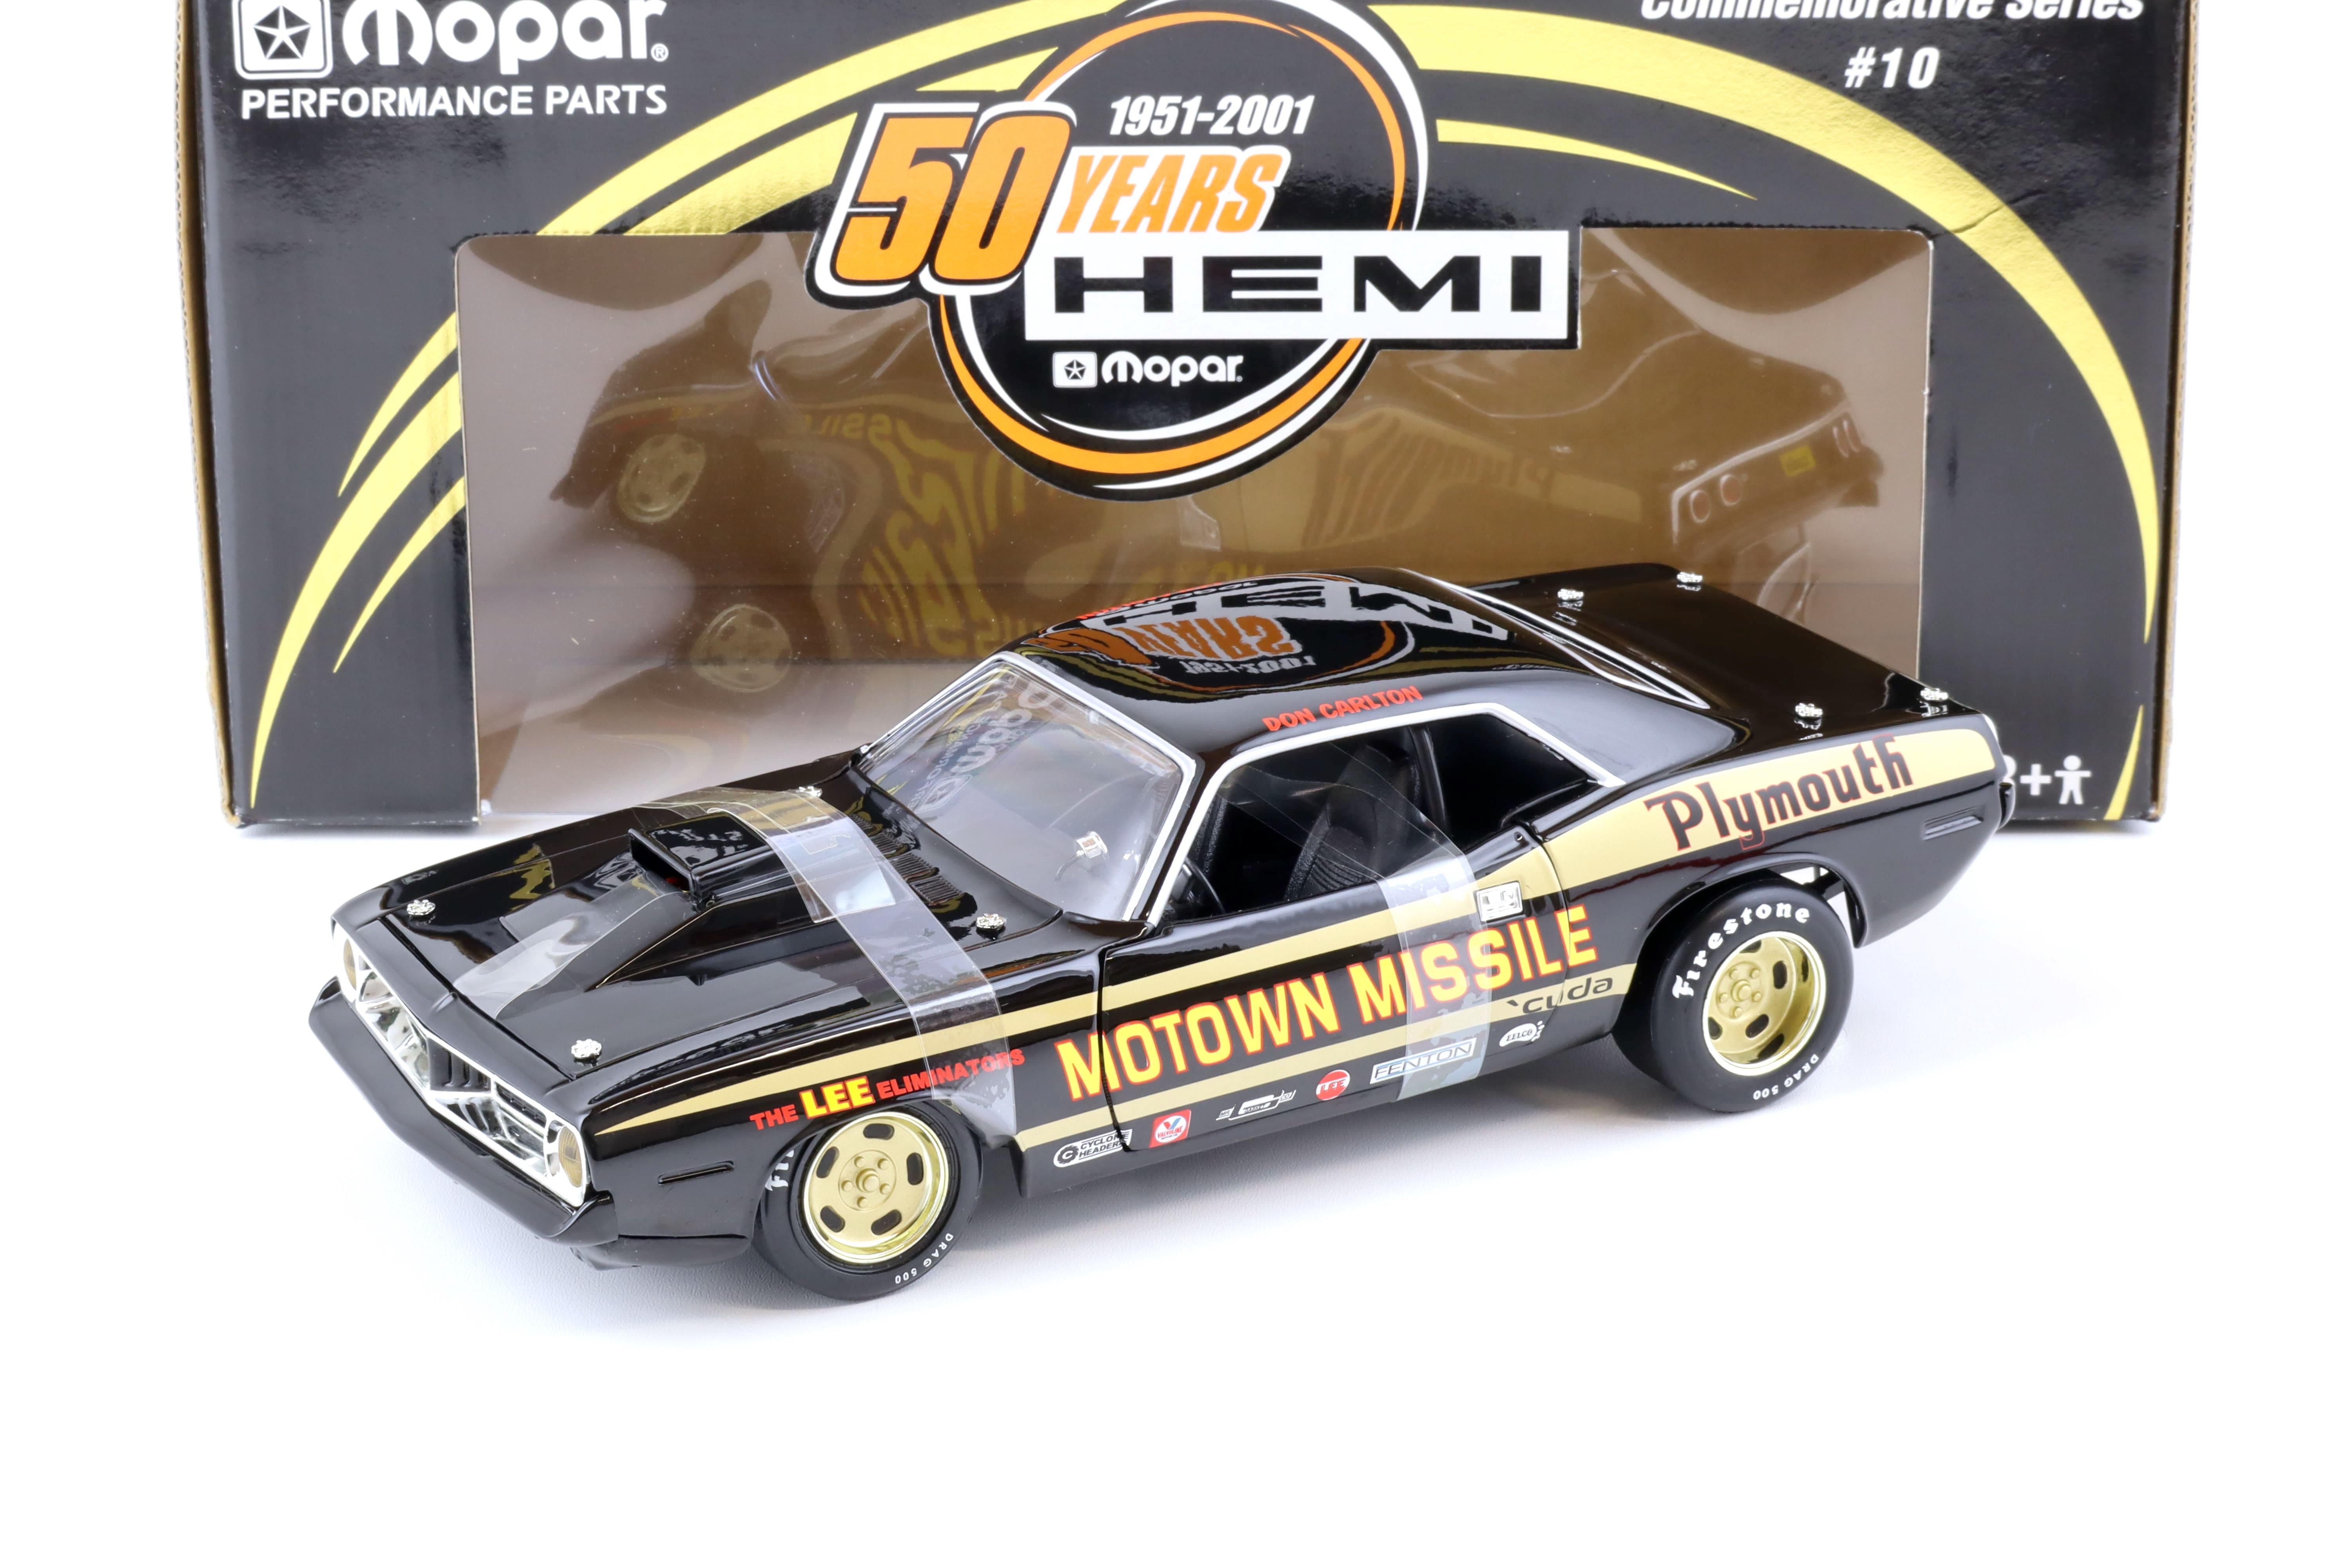 1:18 ERTL Collectibles 1972 Plymouth Barracuda Motown Missile black / gold